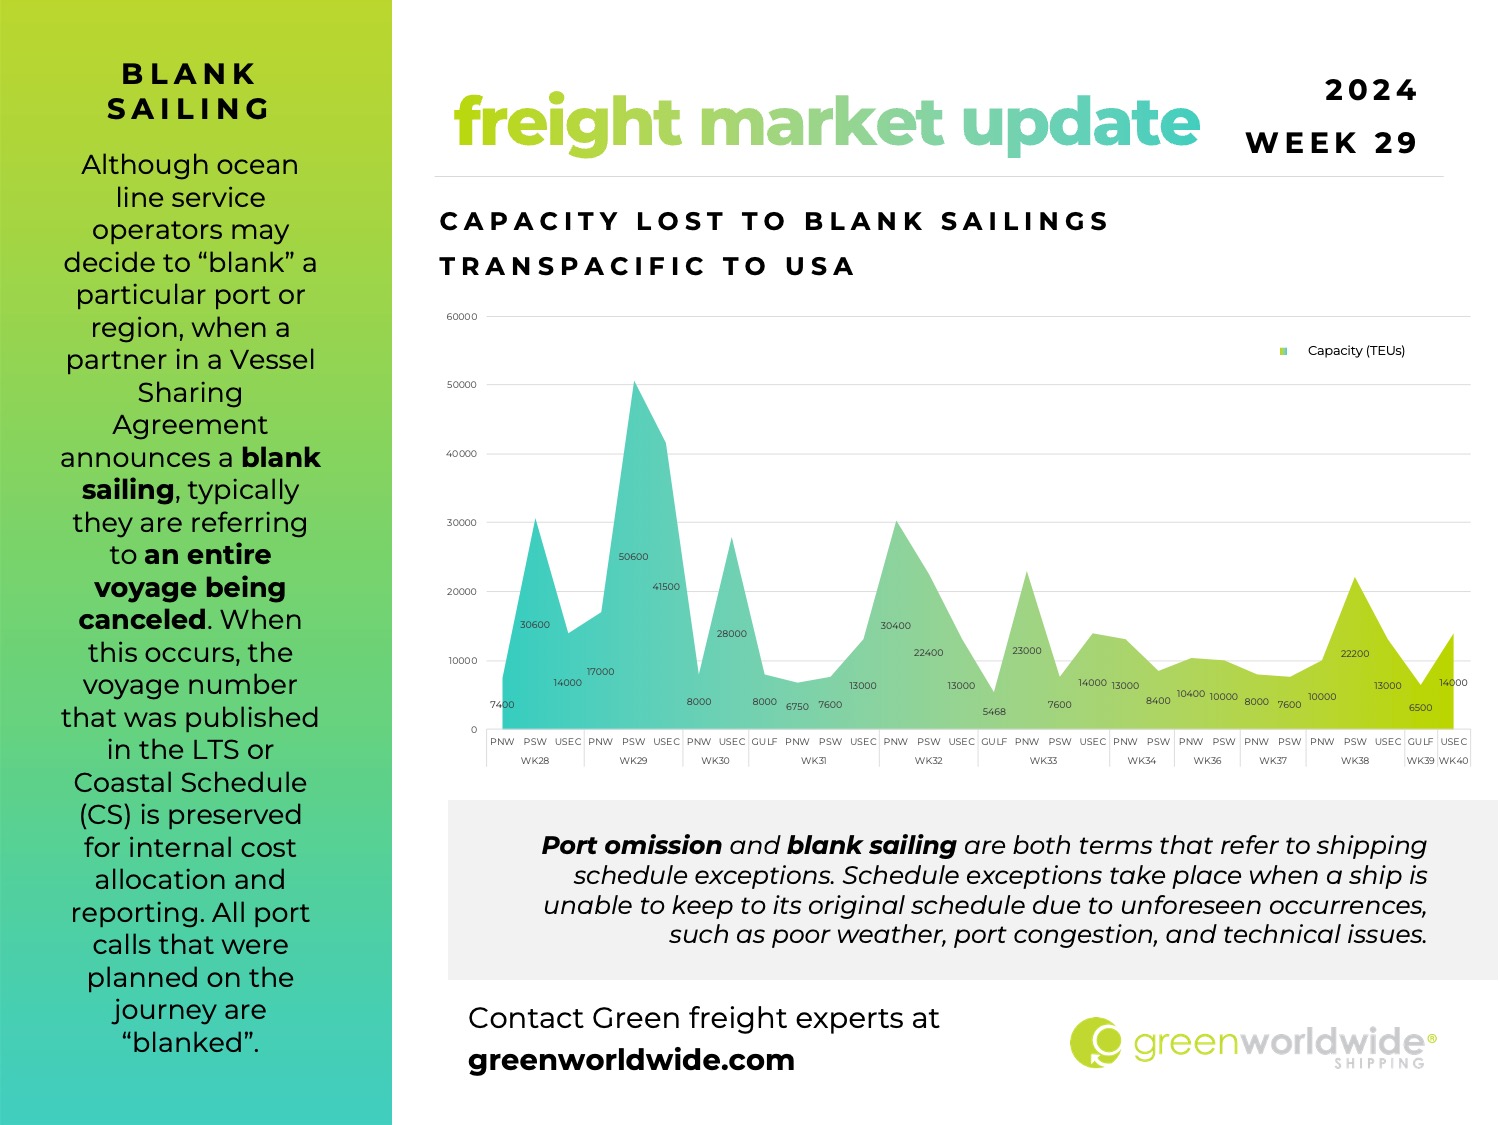 freight market update, port congestion, capacity, cape of good hope, severe weather, railcar shortage